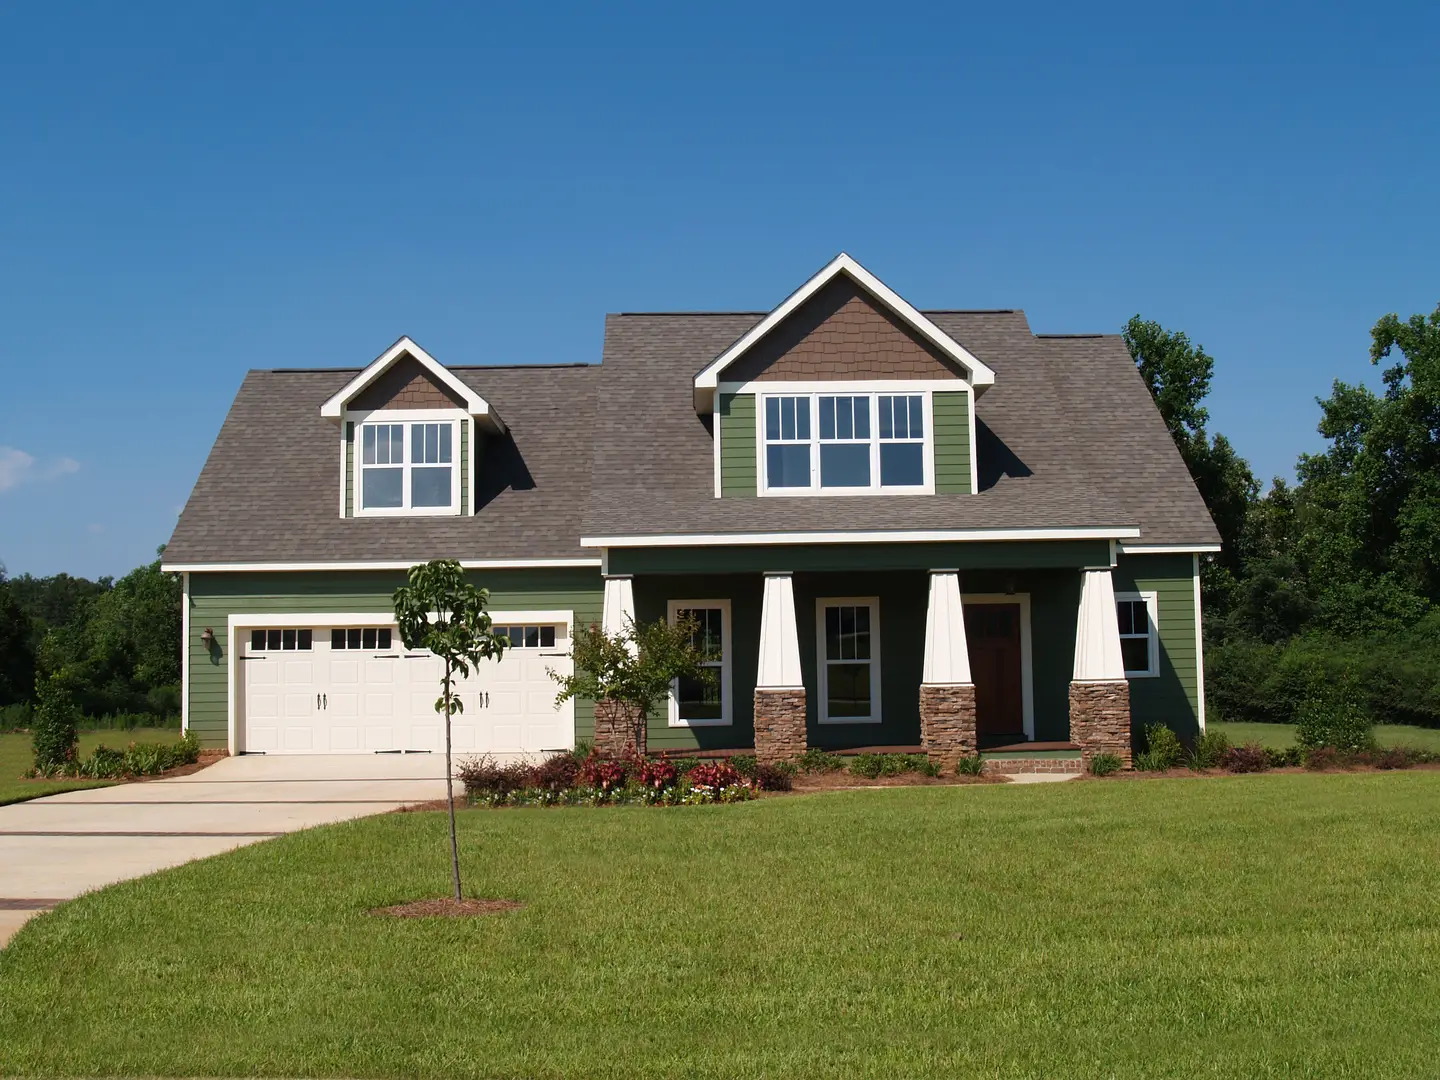 Explore the finest James Hardie siding installation and replacement services in Middlesex County with Solid State Construction. Contact us today to begin!